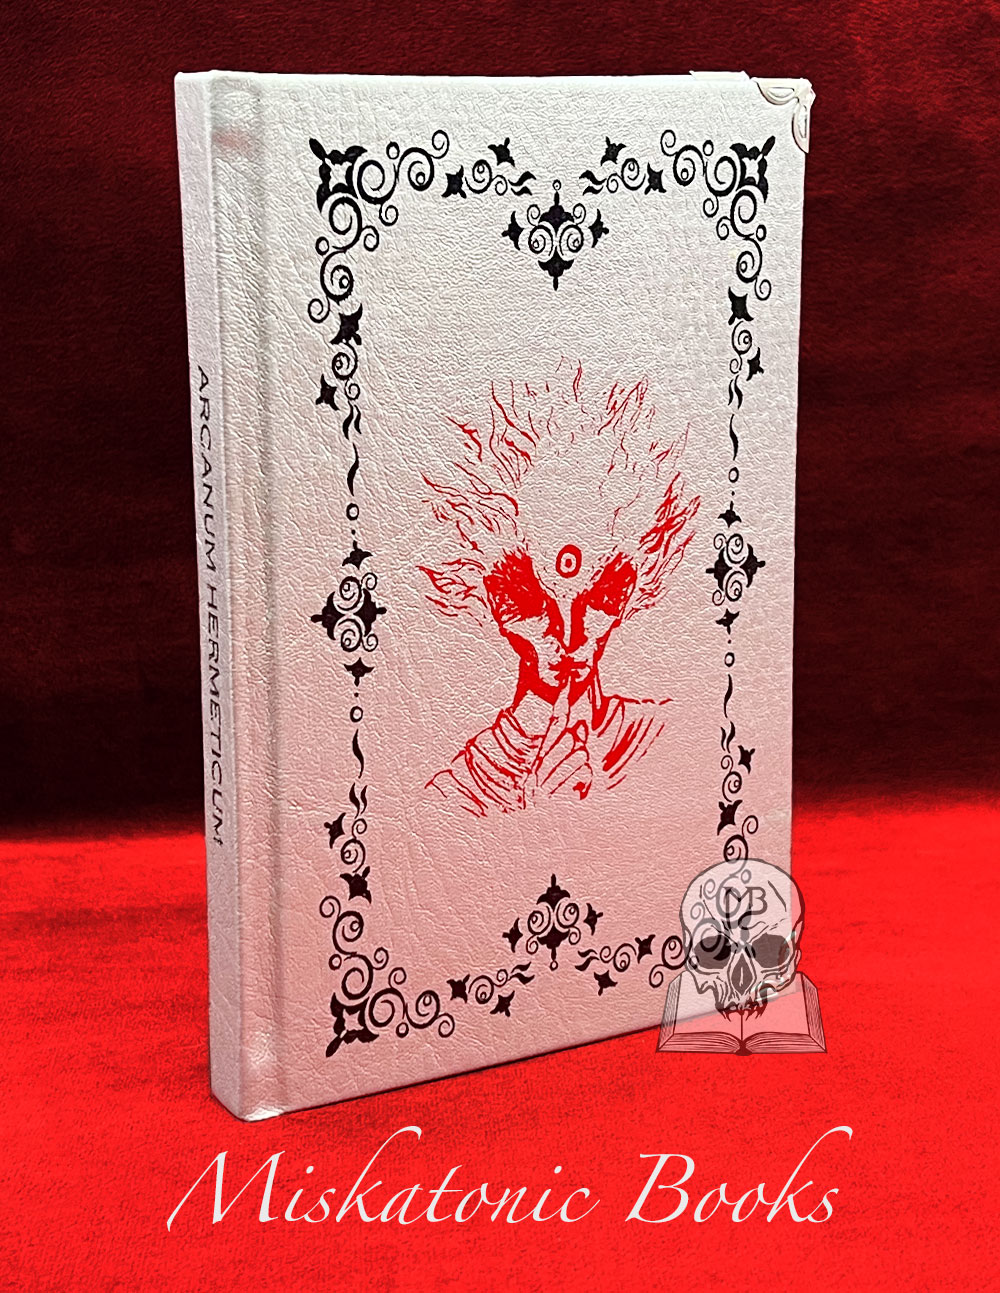 ARCANUM HERMETICUM by Magnus Sarmax - Deluxe Leather Bound Edition with Altar Cloth